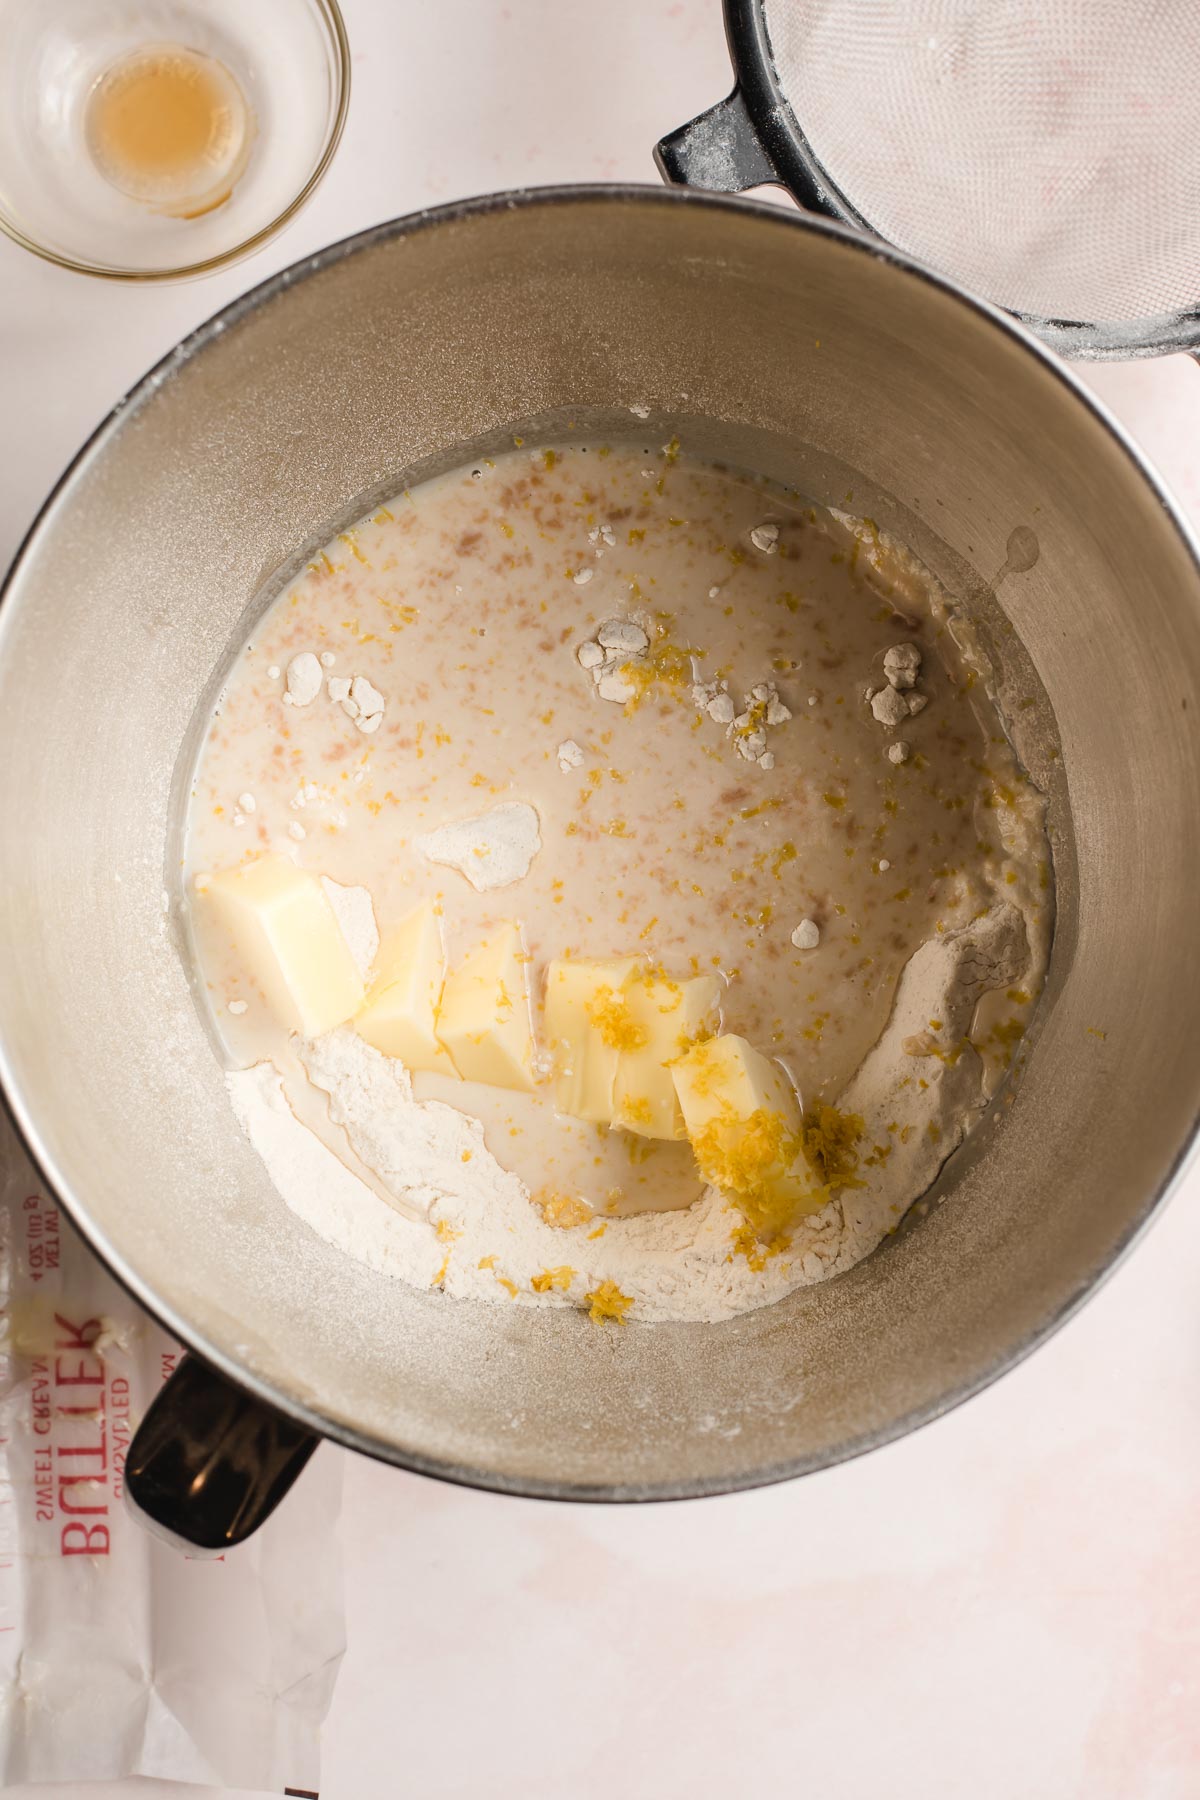 Chunks of butter, vanilla, and lemon zest being worked into flour.